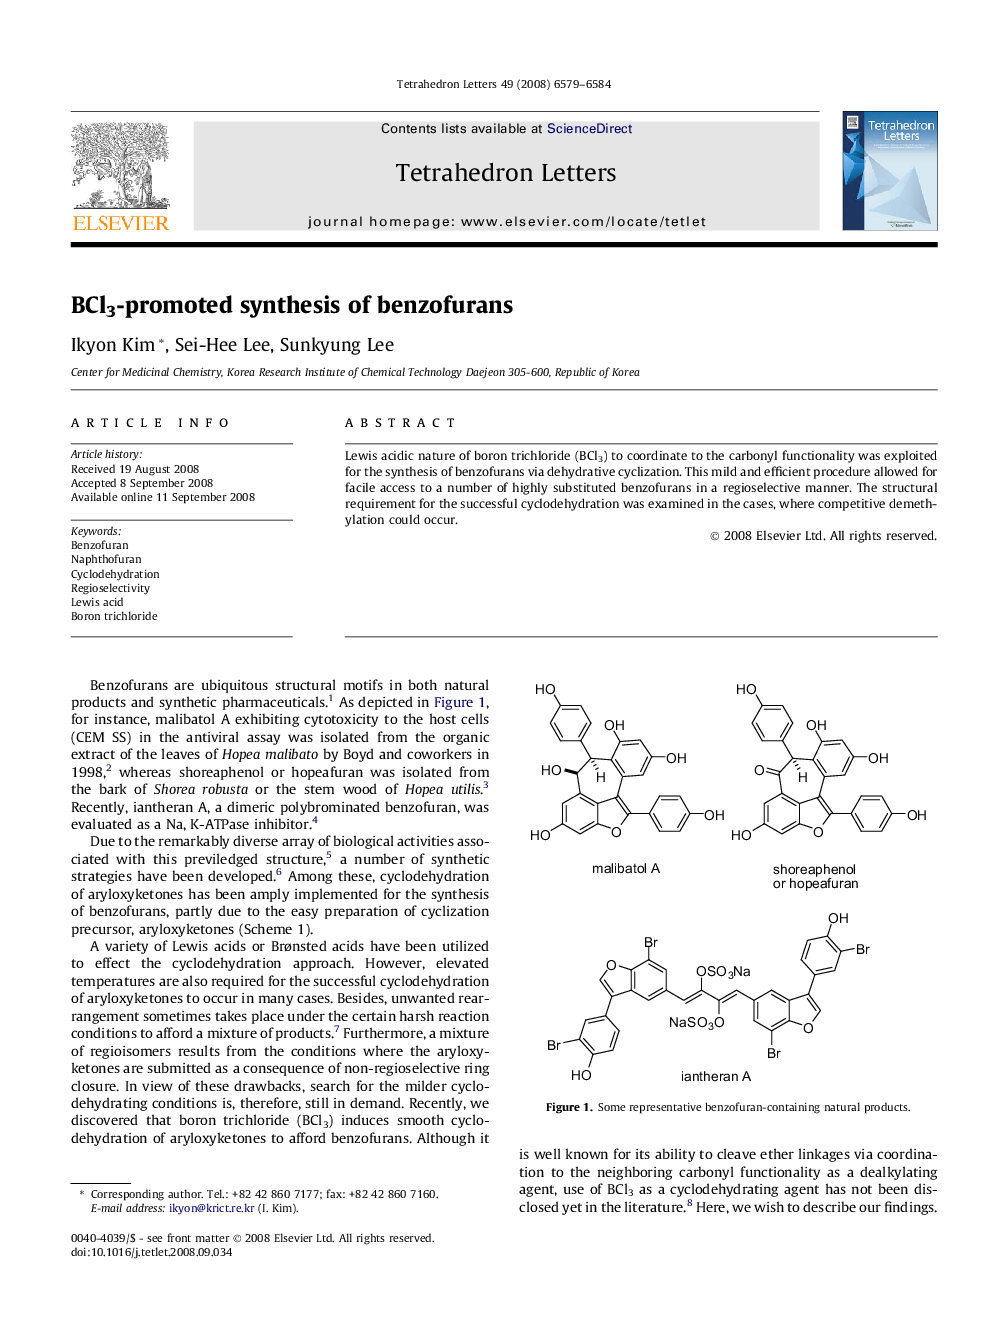 BCl3-promoted synthesis of benzofurans